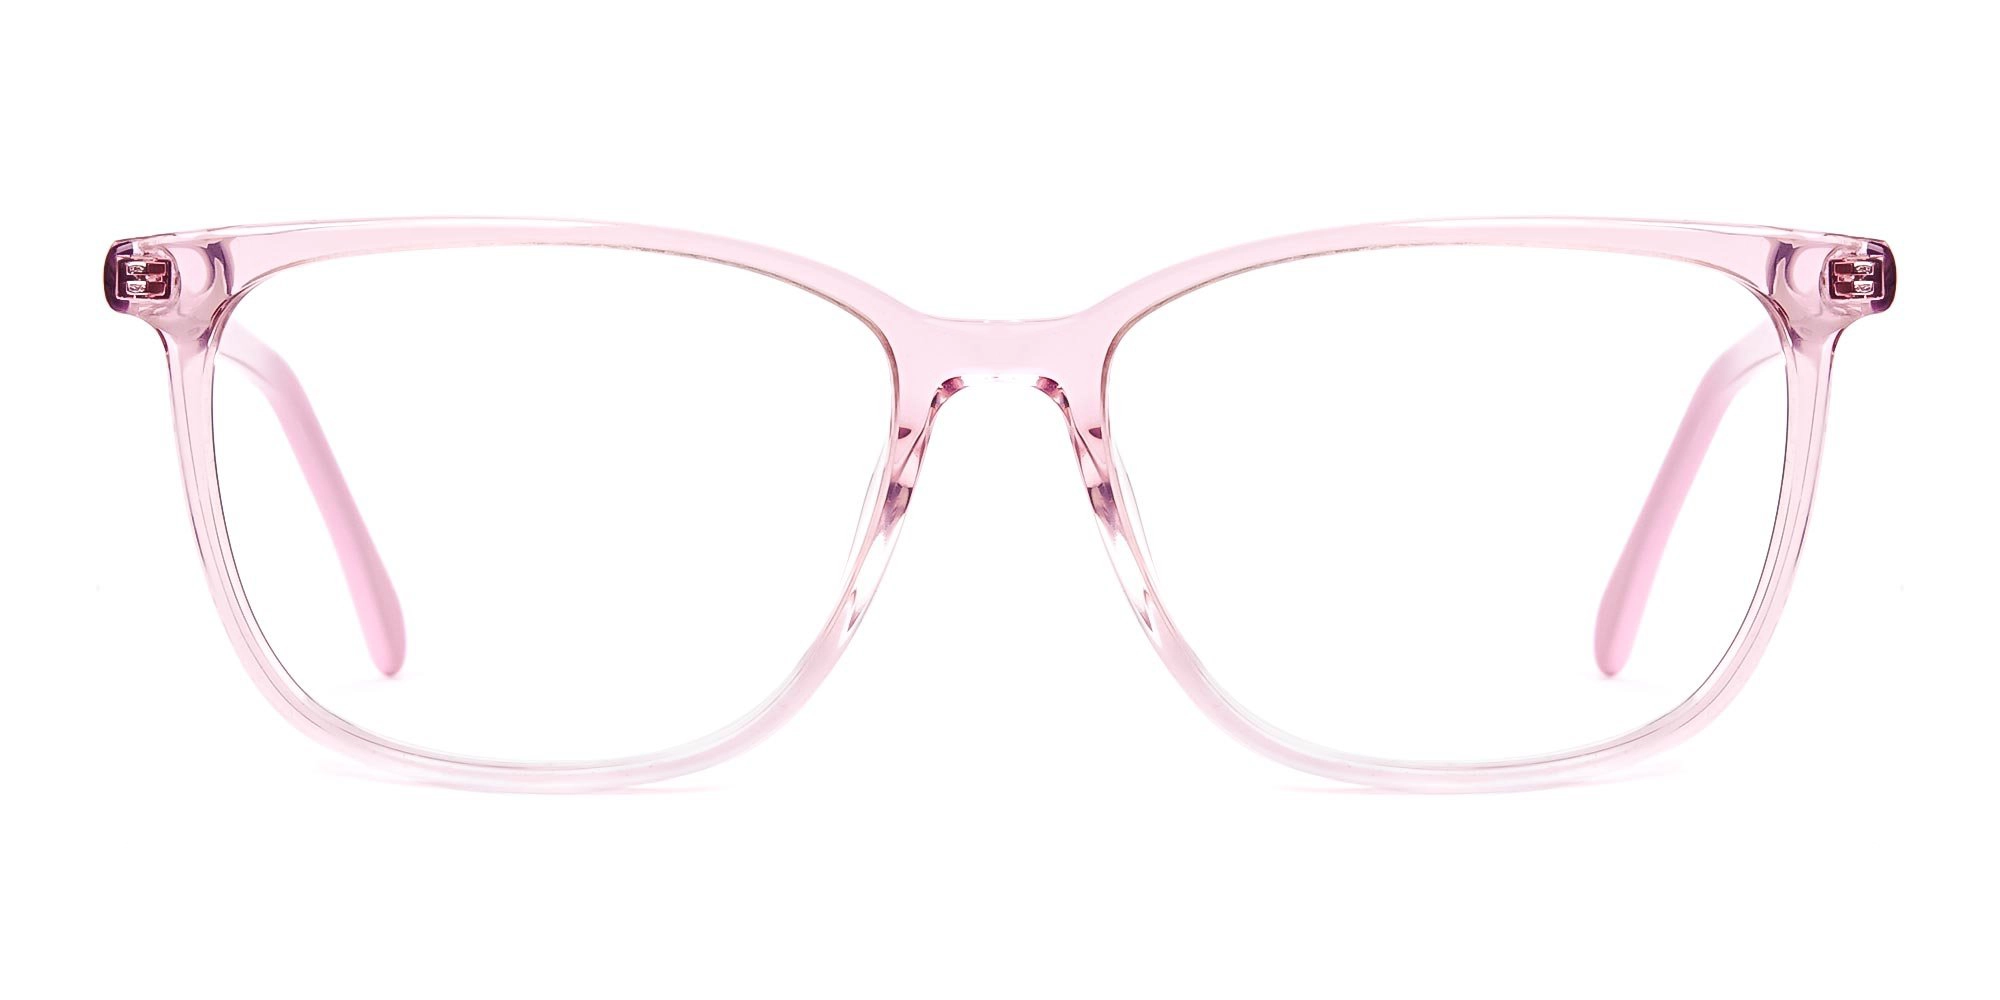 Crystal-Clear-or-Transparent-Blossom-and-Hot-Pink-square-Rectangular-Glasses-Frames-1